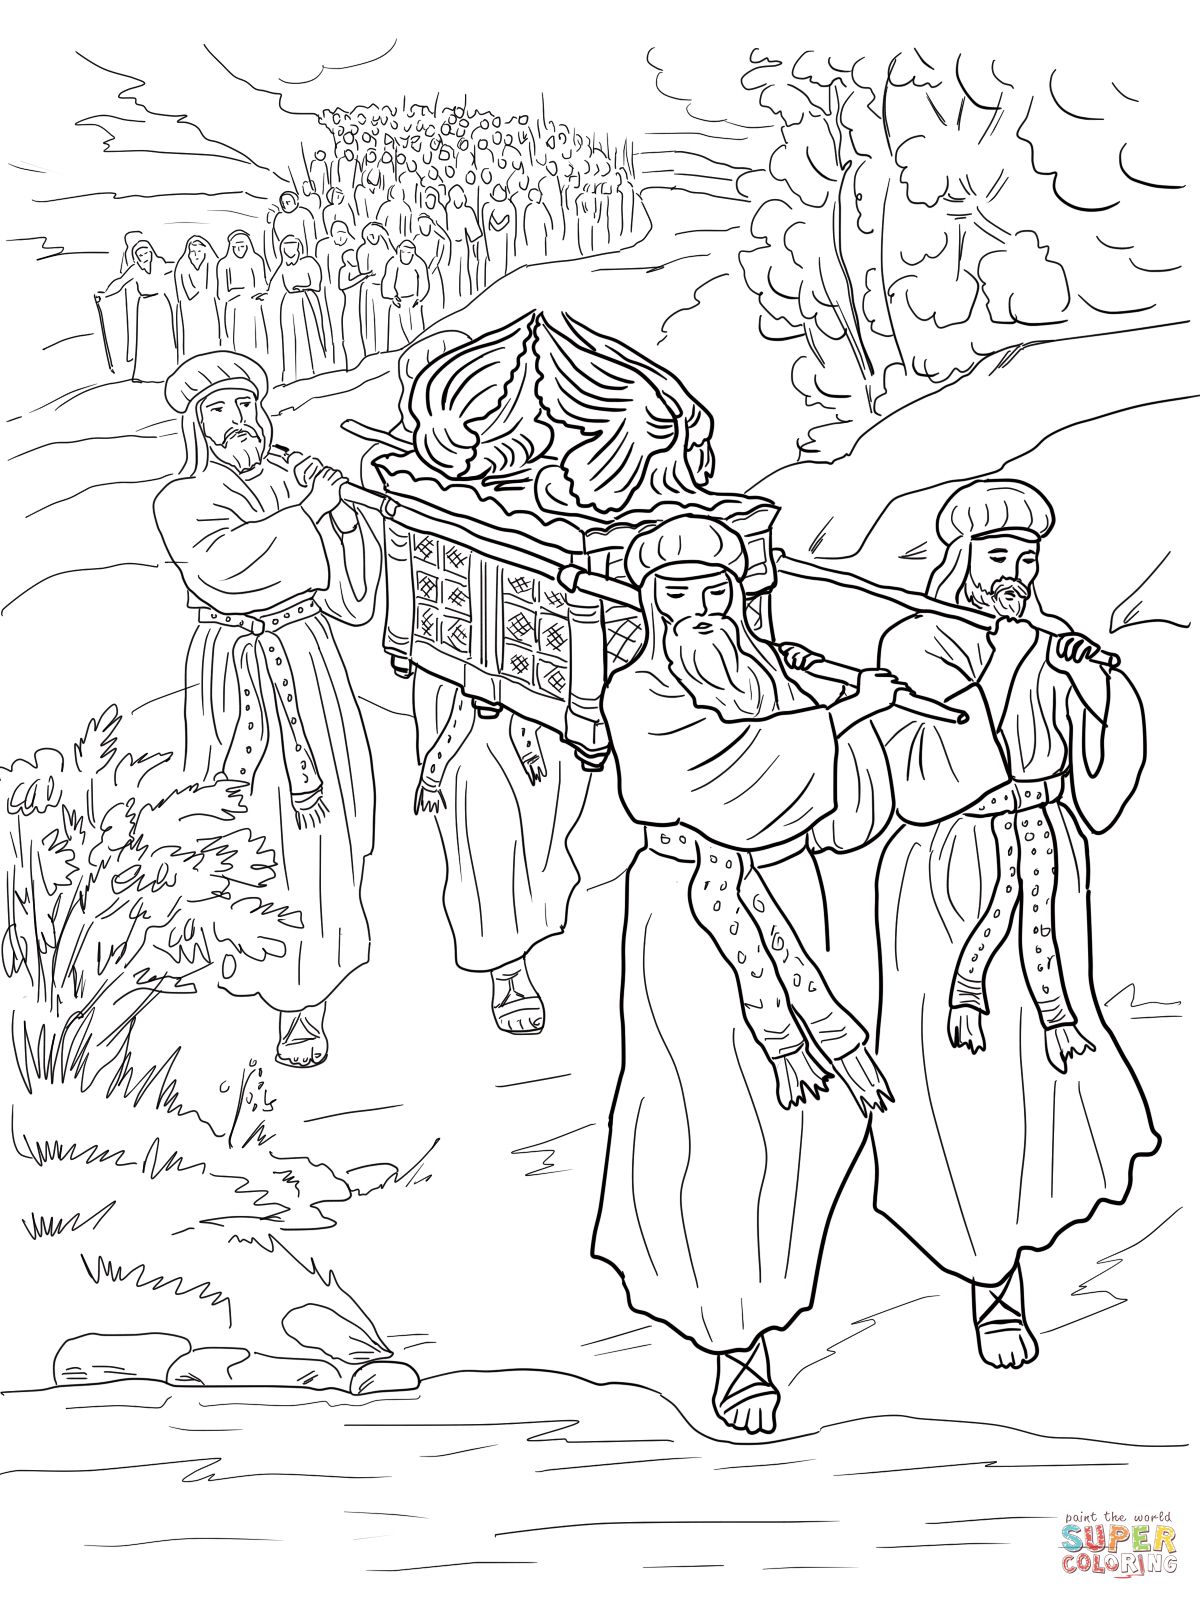 Rahab And The Spies Coloring Page Sketch Coloring Page